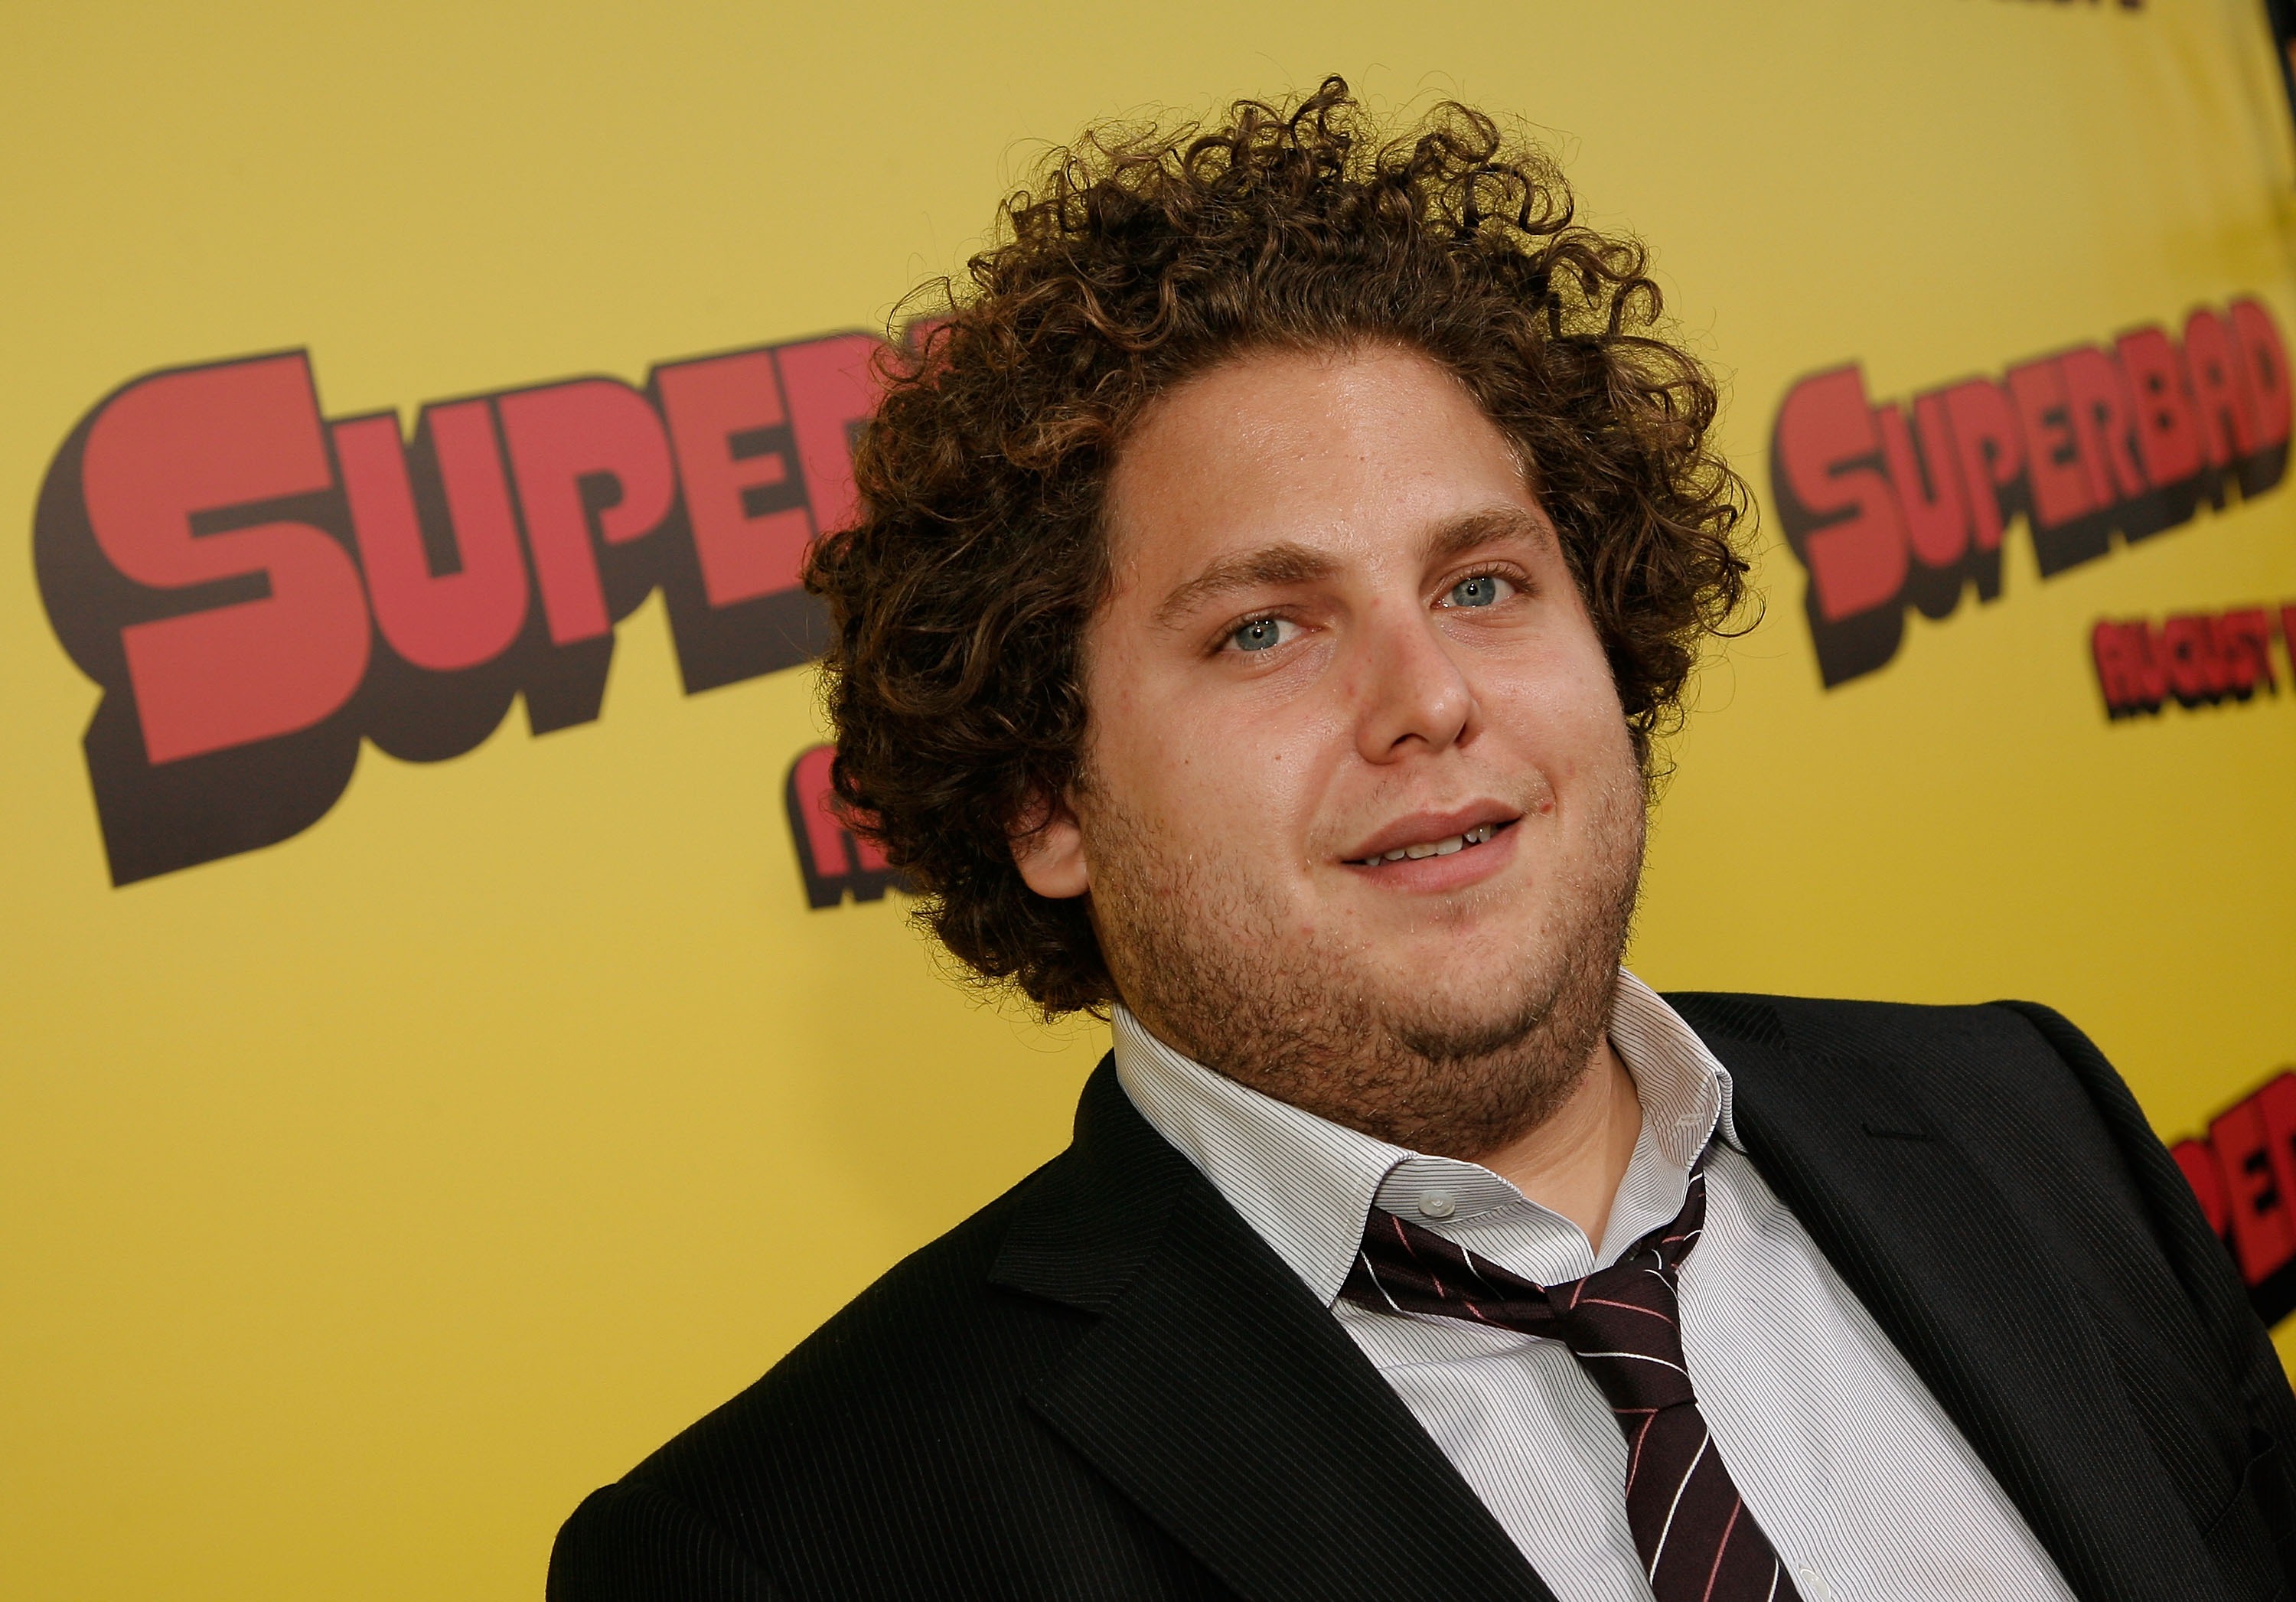 Jonah Hill Slimmed Down And Now Looks Shredded AF After Sound Advice ...